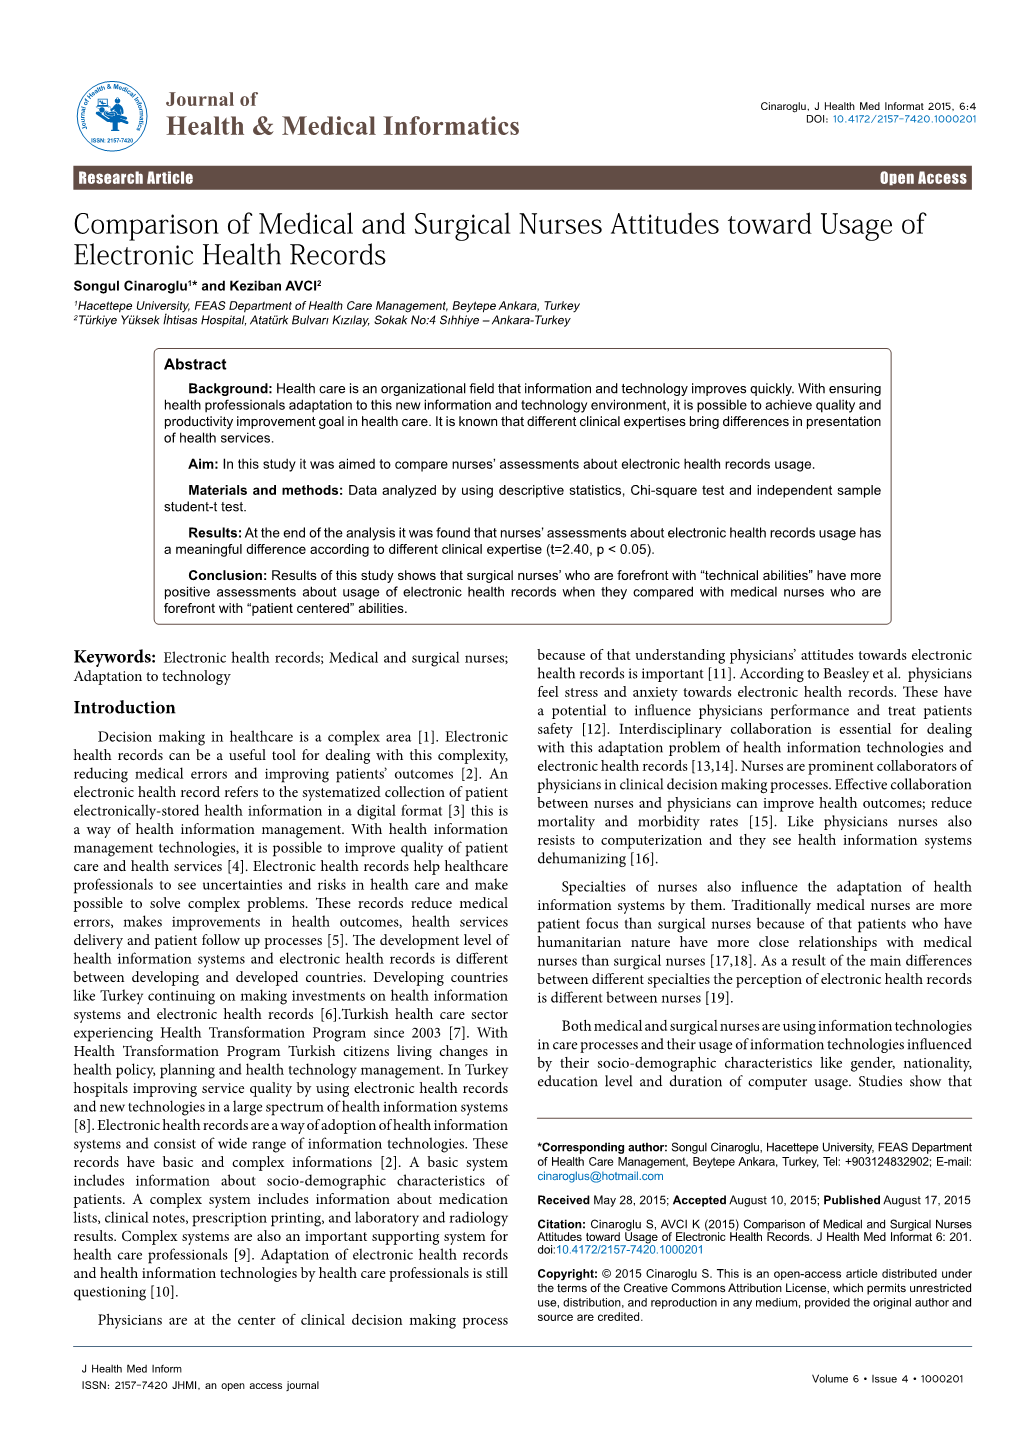 Comparison of Medical and Surgical Nurses Attitudes Toward Usage Of